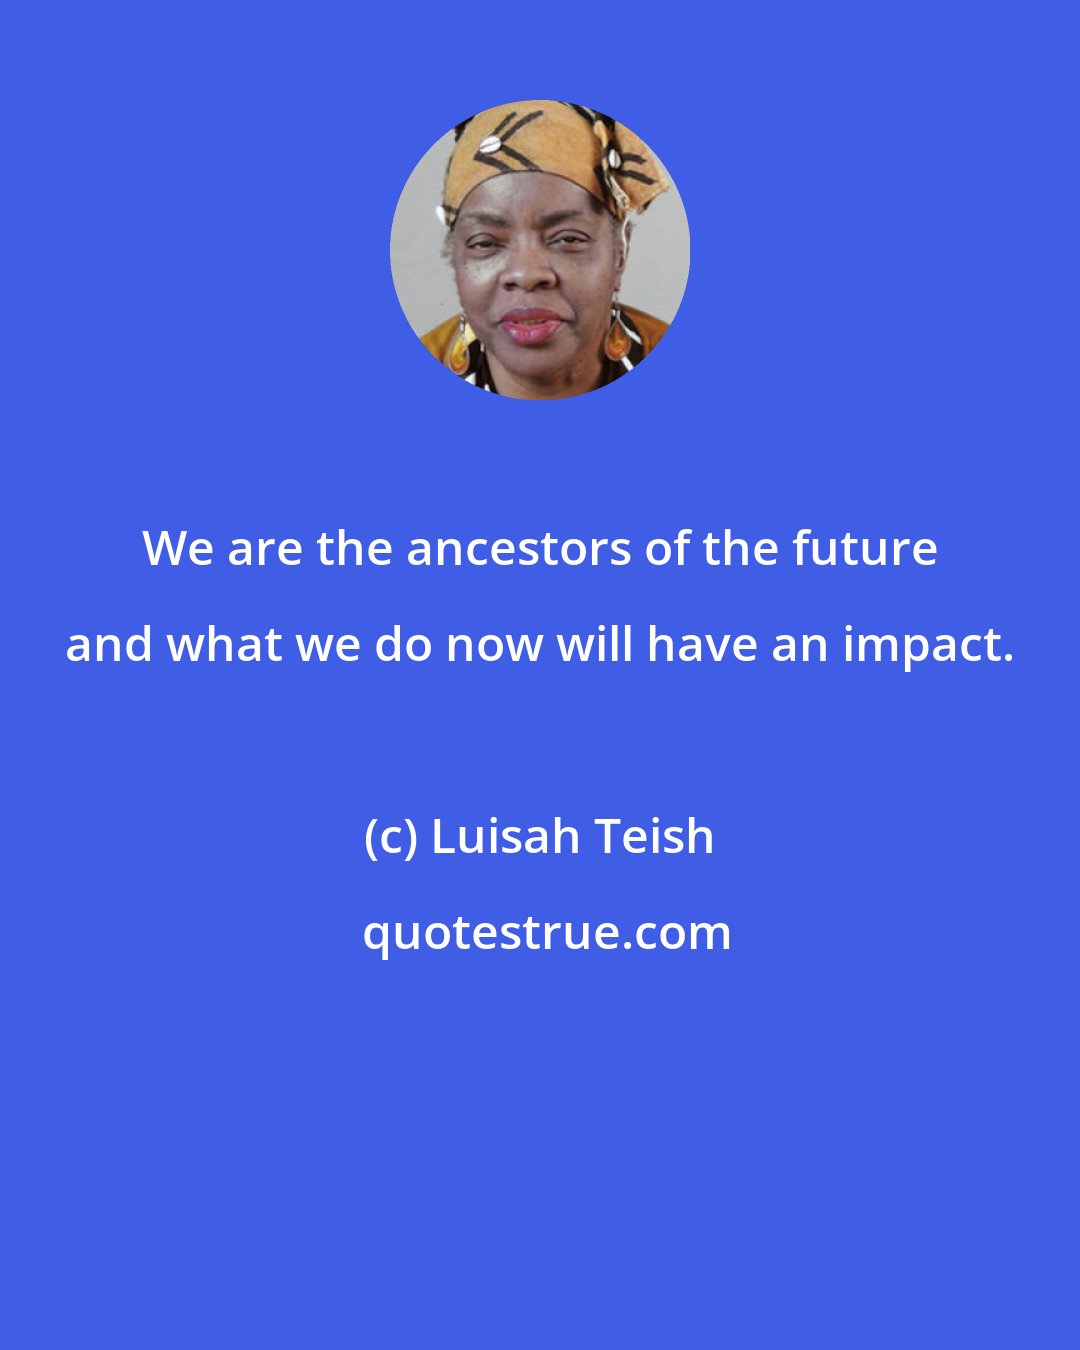 Luisah Teish: We are the ancestors of the future and what we do now will have an impact.